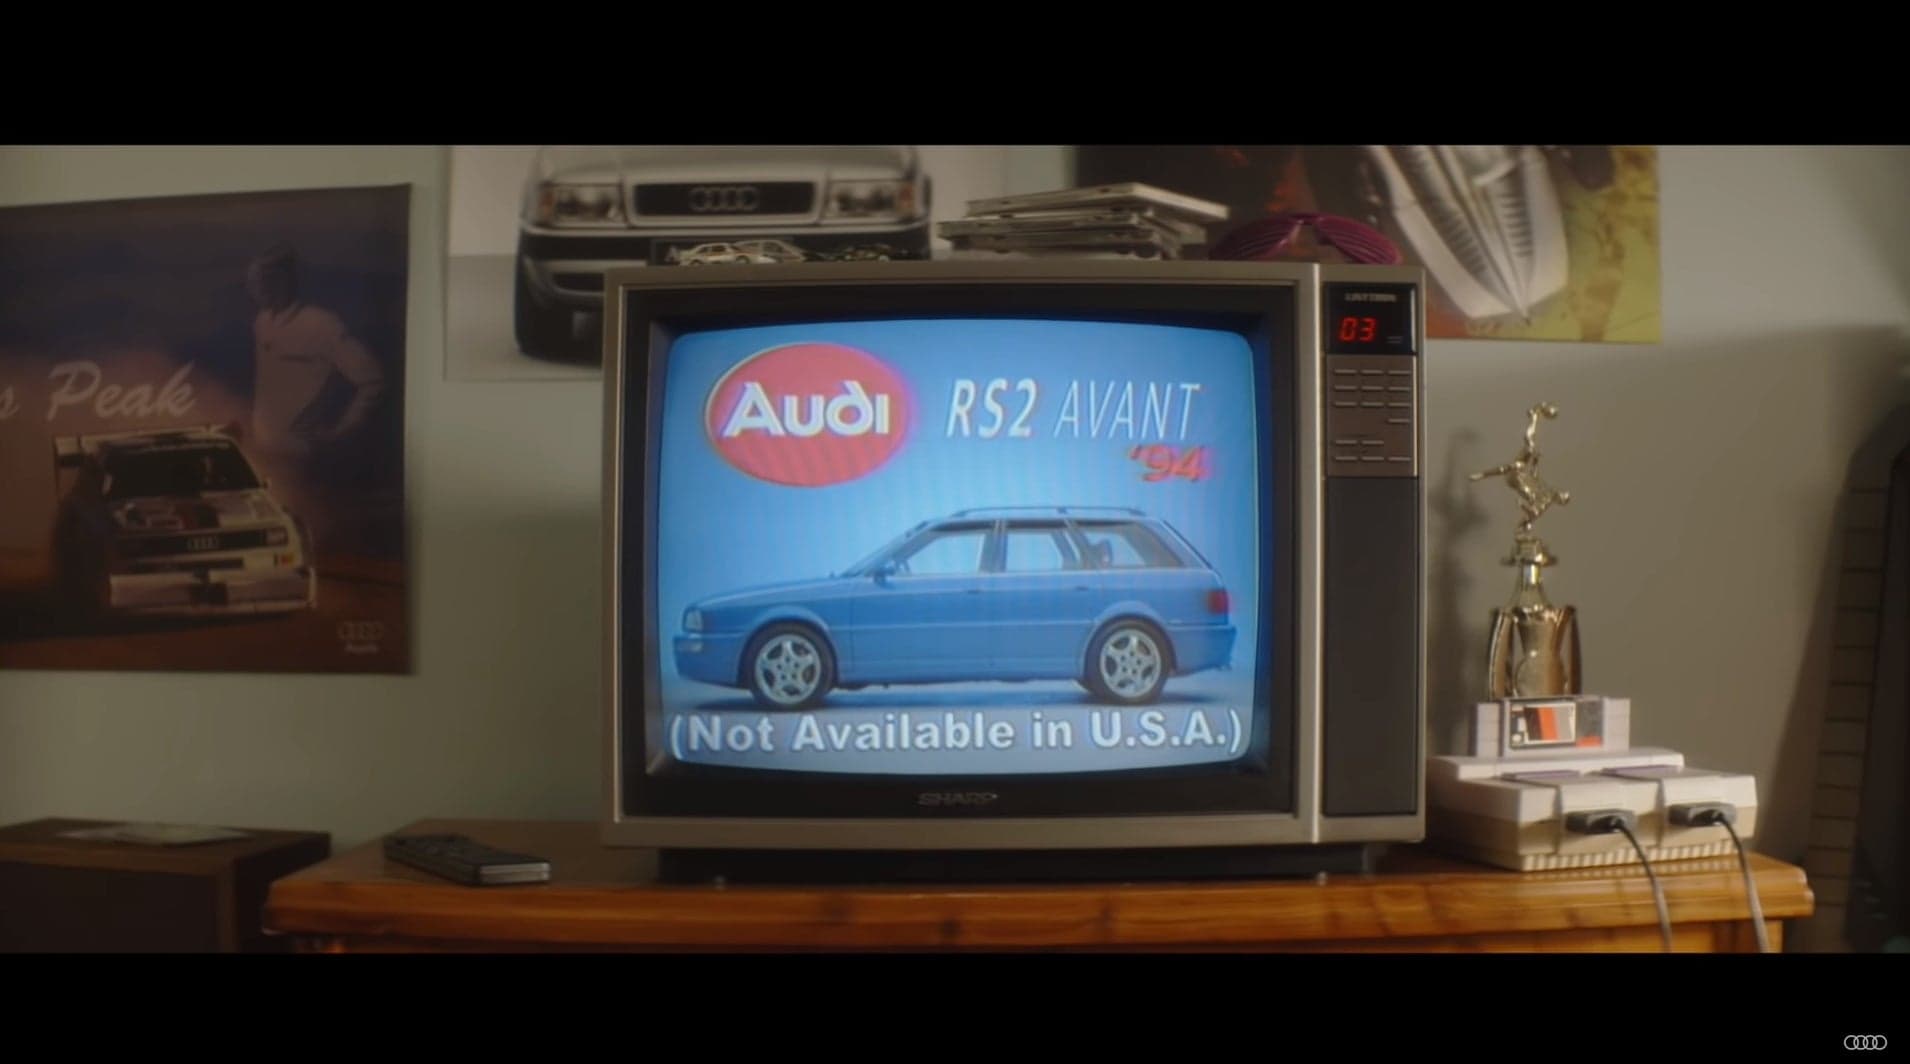 This All-New, Period-Correct Ad Celebrating the 1994 Audi RS 2 Is Retro Perfection